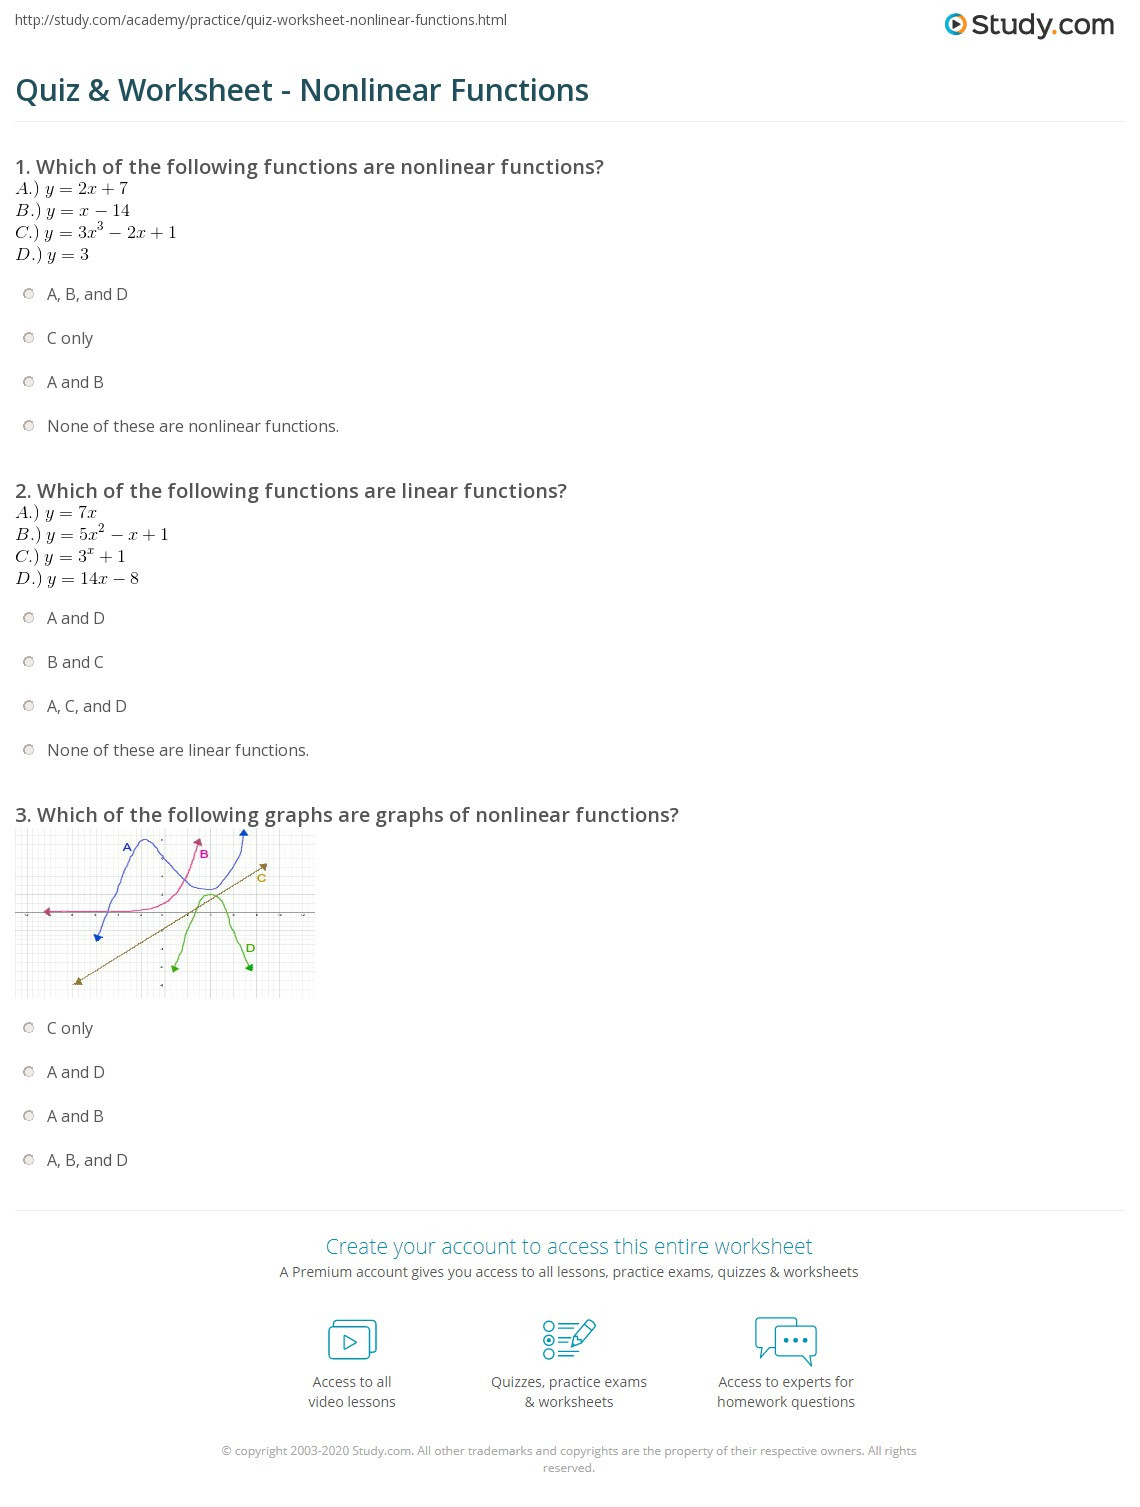 Linear and Nonlinear Functions Worksheet Quiz &amp; Worksheet Nonlinear Functions